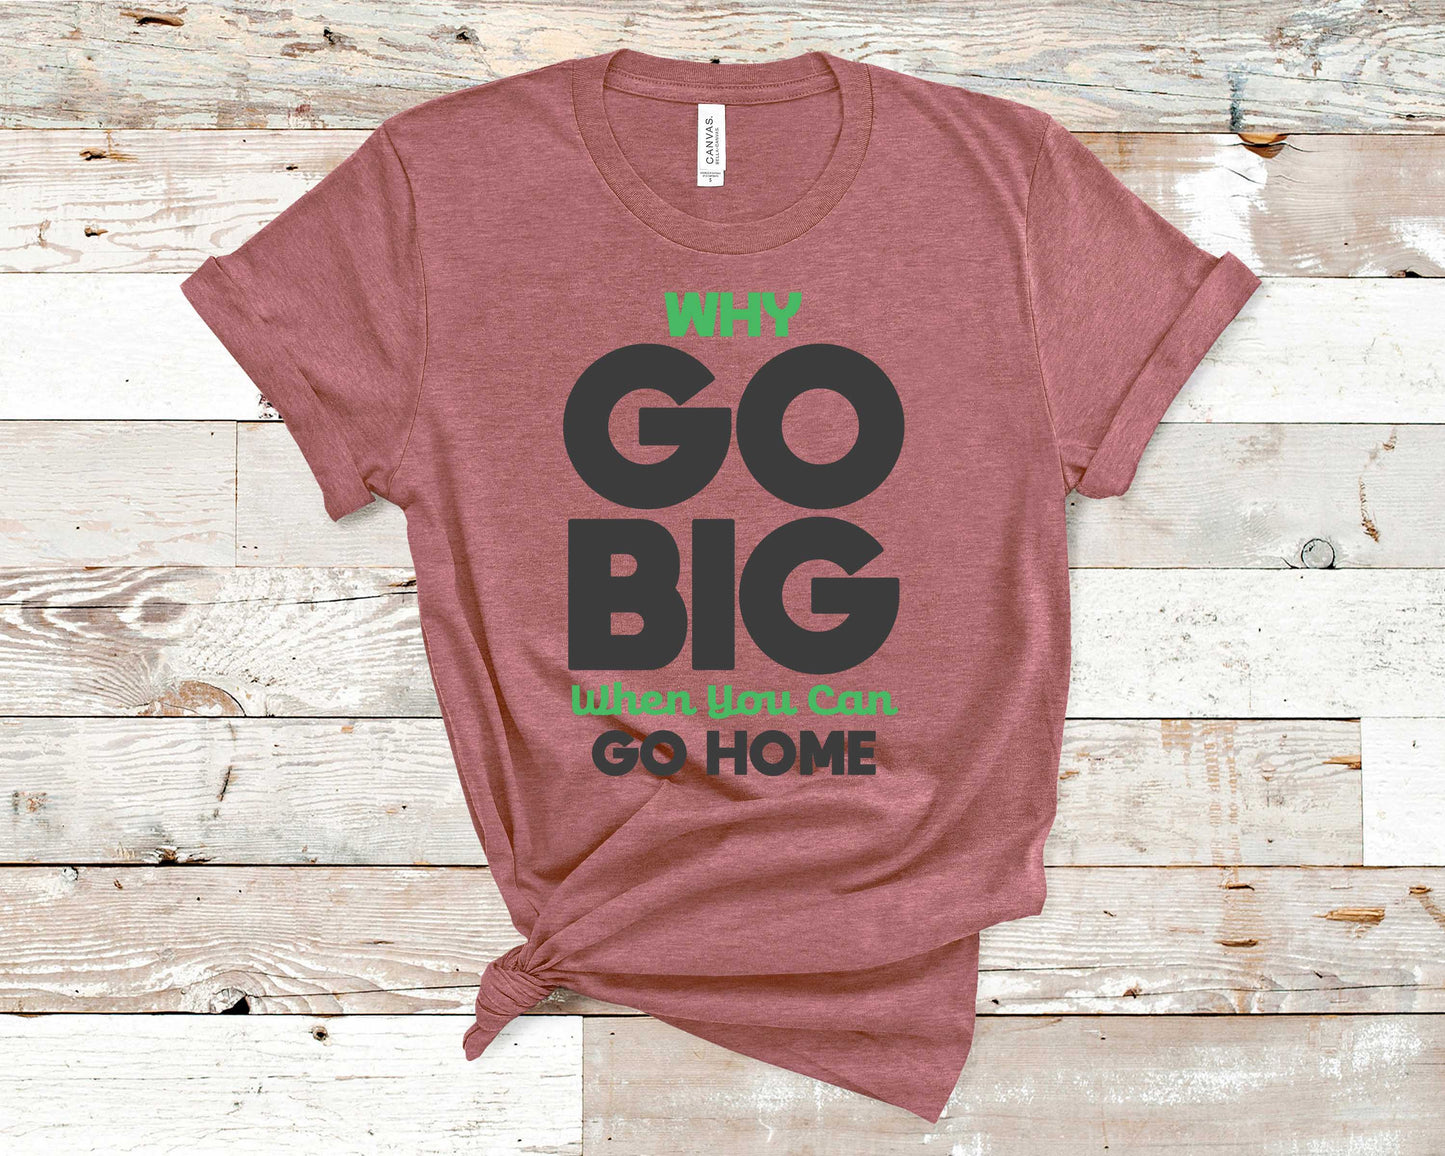 Why Go Big When You Can Go Home - Funny/ Sarcastic